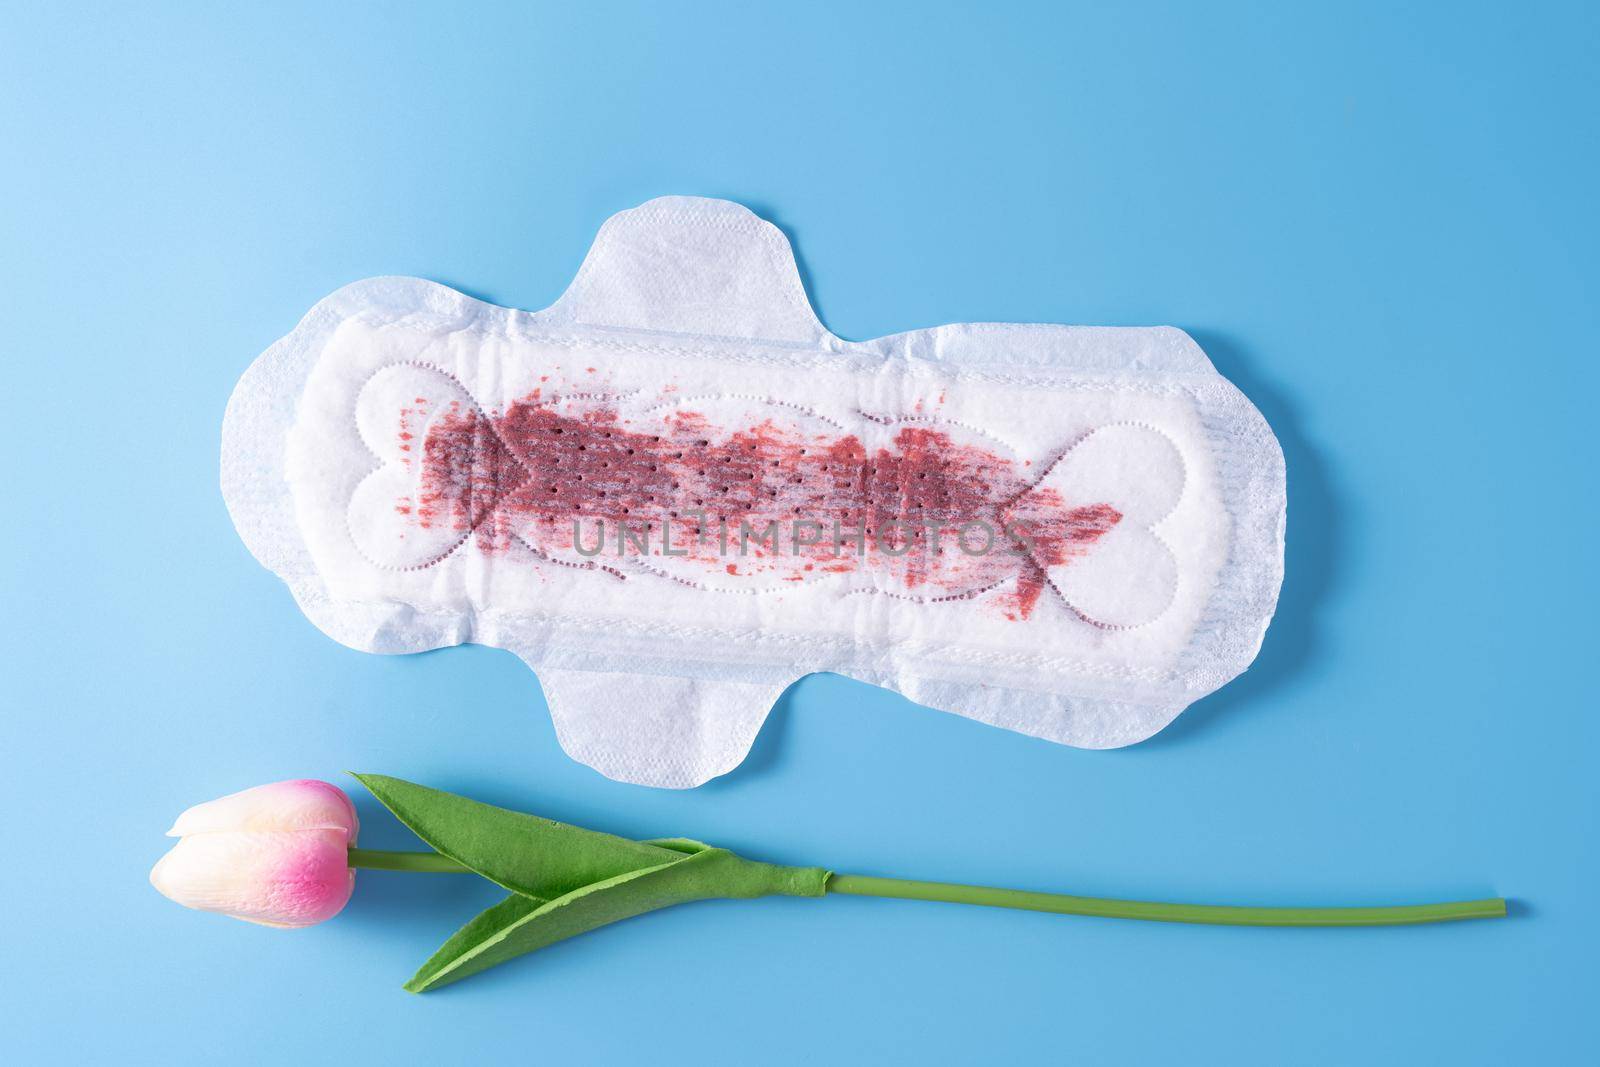 Used Sanitary pad with full amount of blood, Sanitary napkin with tulip flower on blue background. Menstruation, Feminine hygiene, top view.